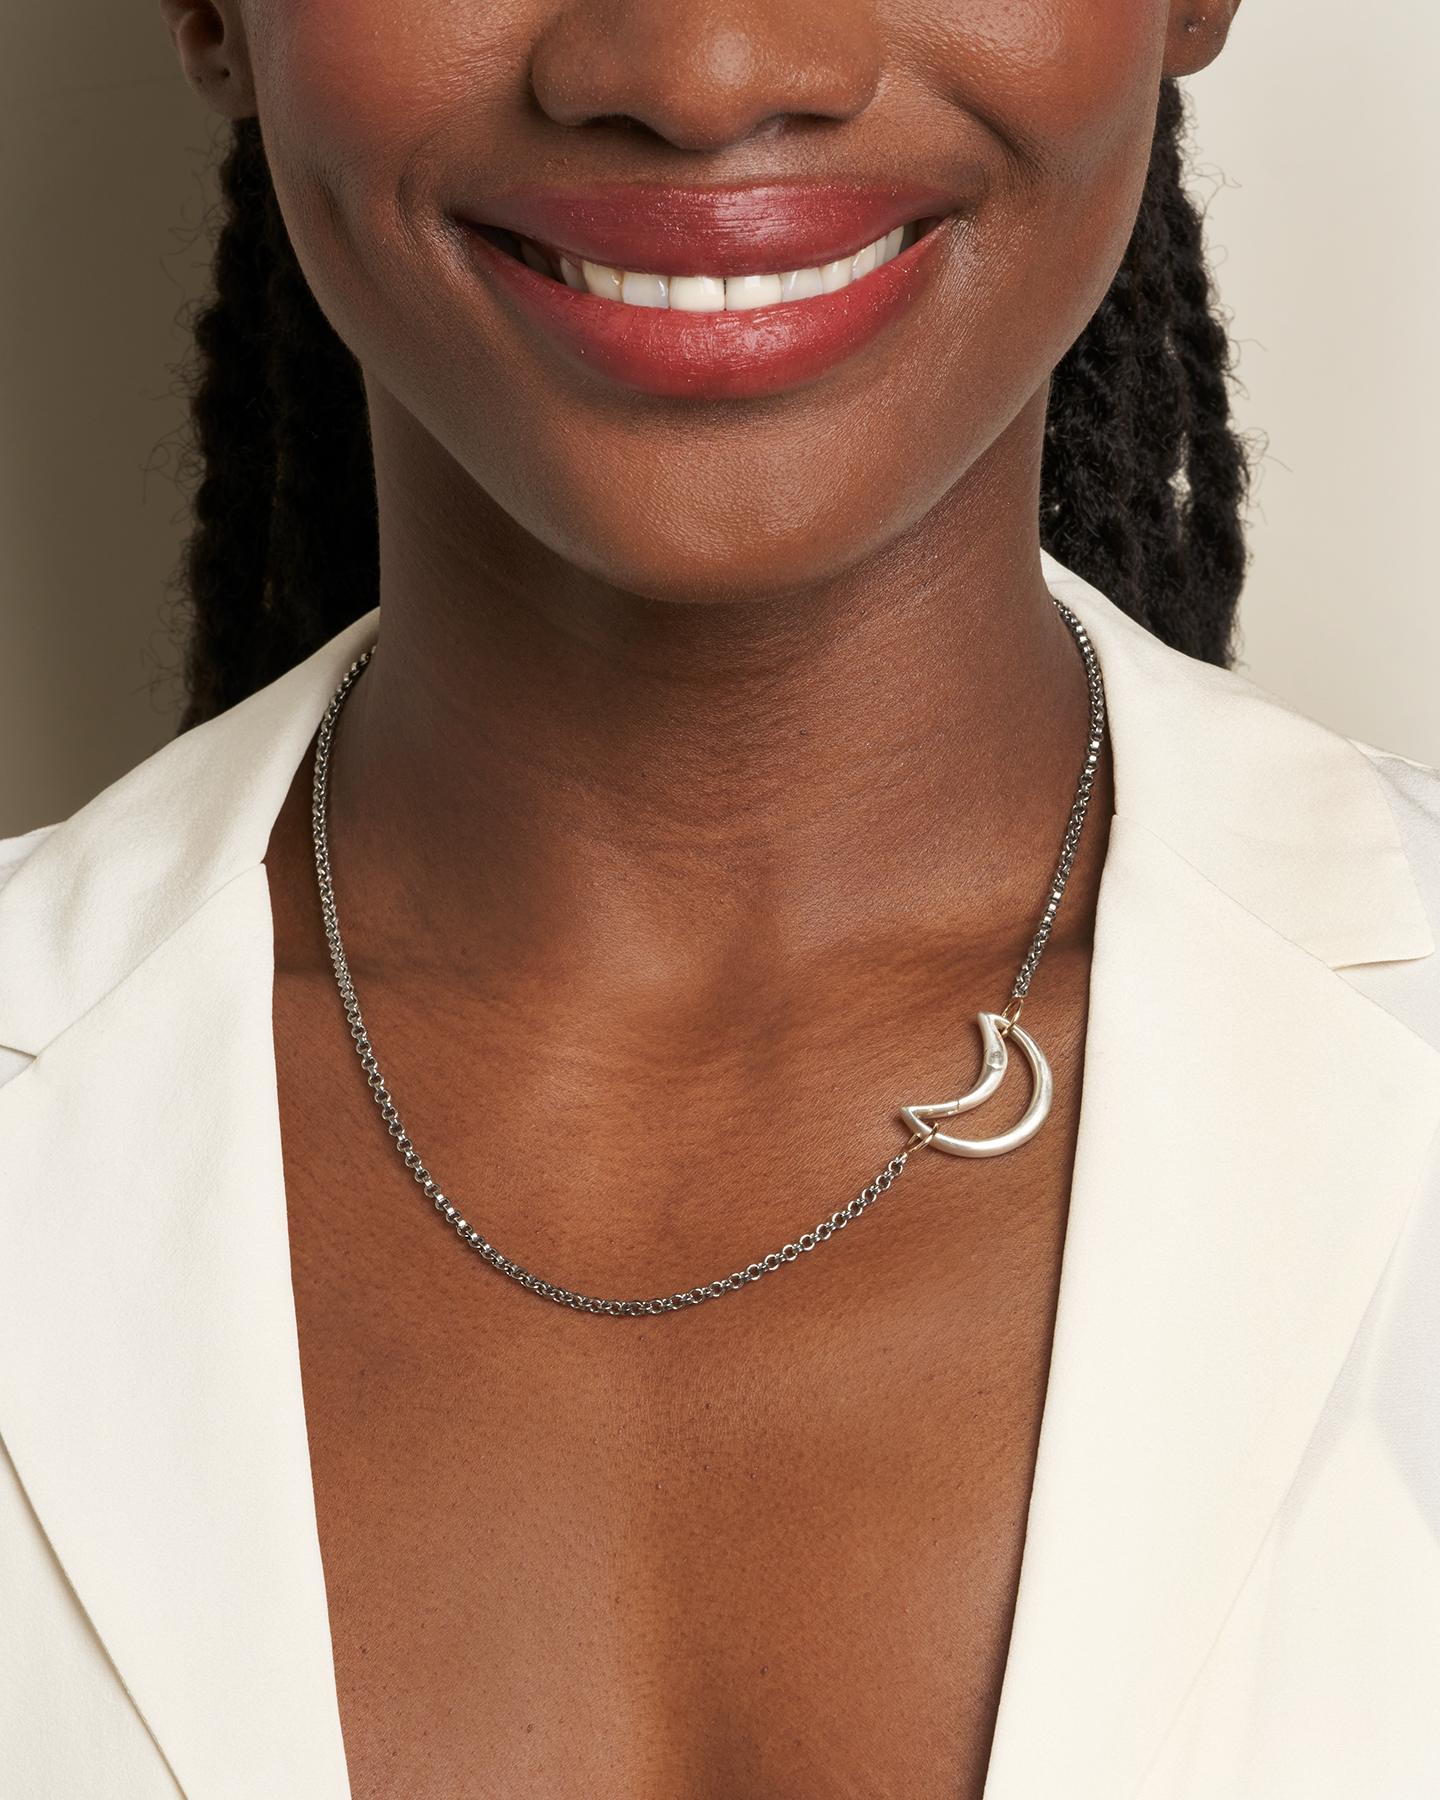 Close up of woman's decolletage and chin wearing necklace with silver moon lock charm